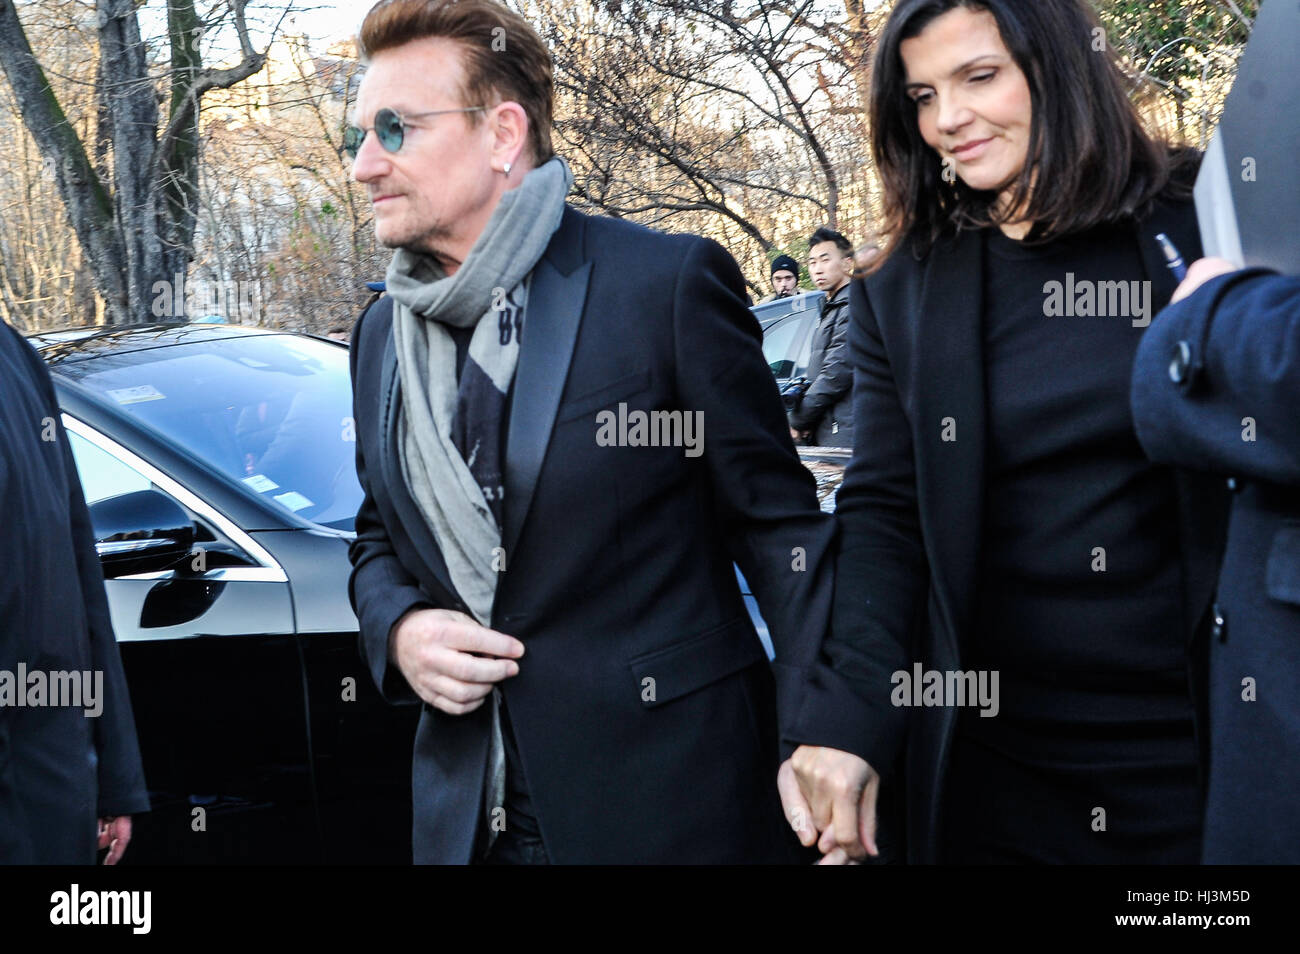 Paris, France. 21st Jan, 2017. Singer Bono and his wife Ali Hewson are seen arriving at Dior Fashion Show during Paris Fashion Week Credit: Gaetano Piazzolla/Pacific Press/Alamy Live News Stock Photo